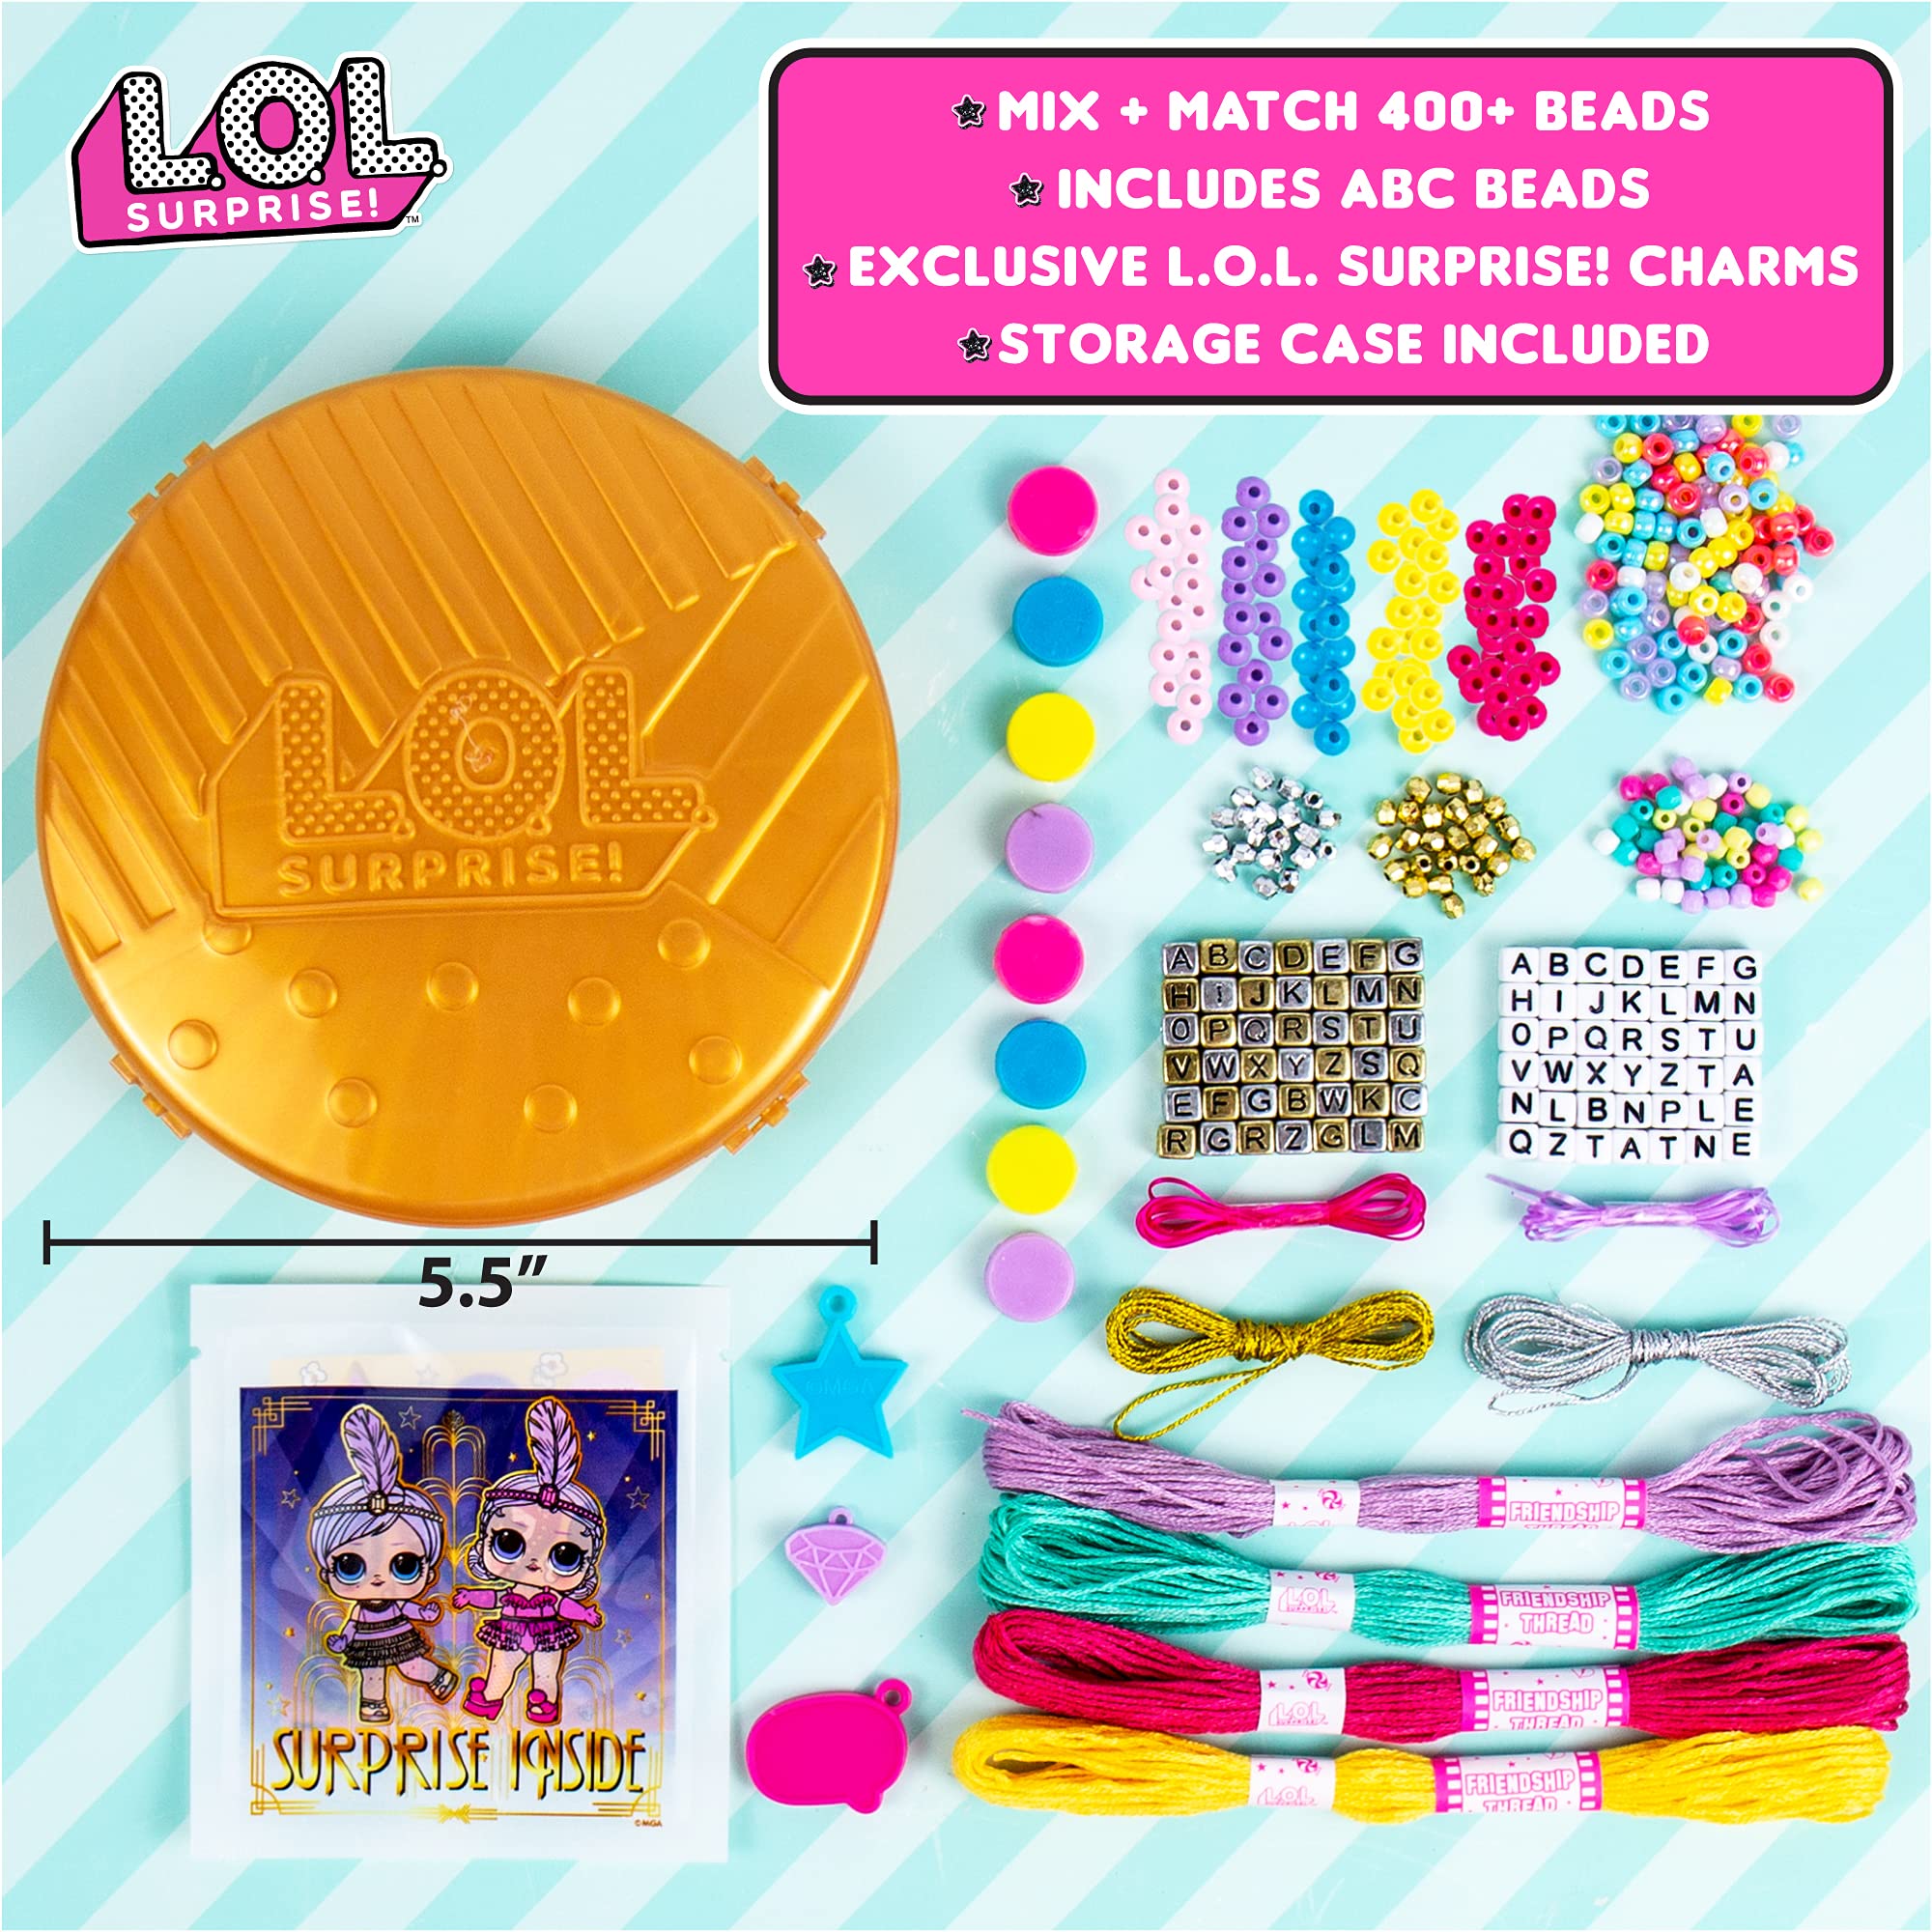 Horizon Group USA L.O.L. Surprise! Surprise Jewelry Case, Double Feature Series, Create Over 25 Custom Jewelry Pieces, Includes L.O.L. Surprise! Charms, 500+ Beads, Jewelry Storage Case & More